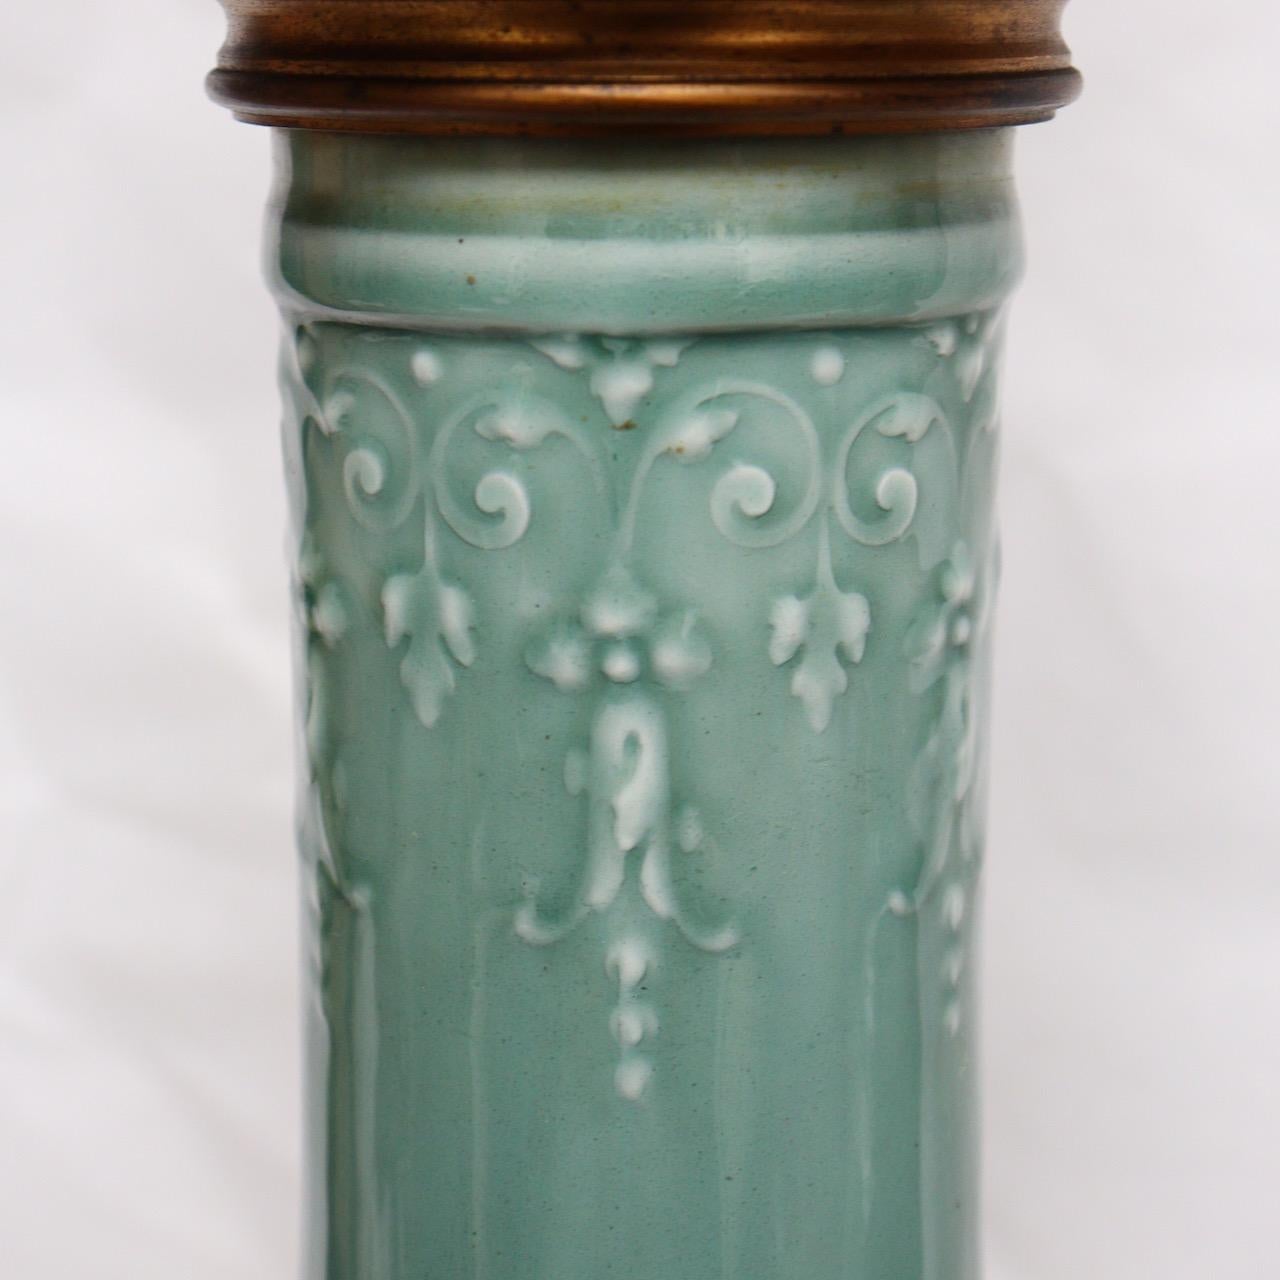 French Pair of Théodore Deck Celadon Enamelled Faience Vases Ormolu-Mounted in Lamps